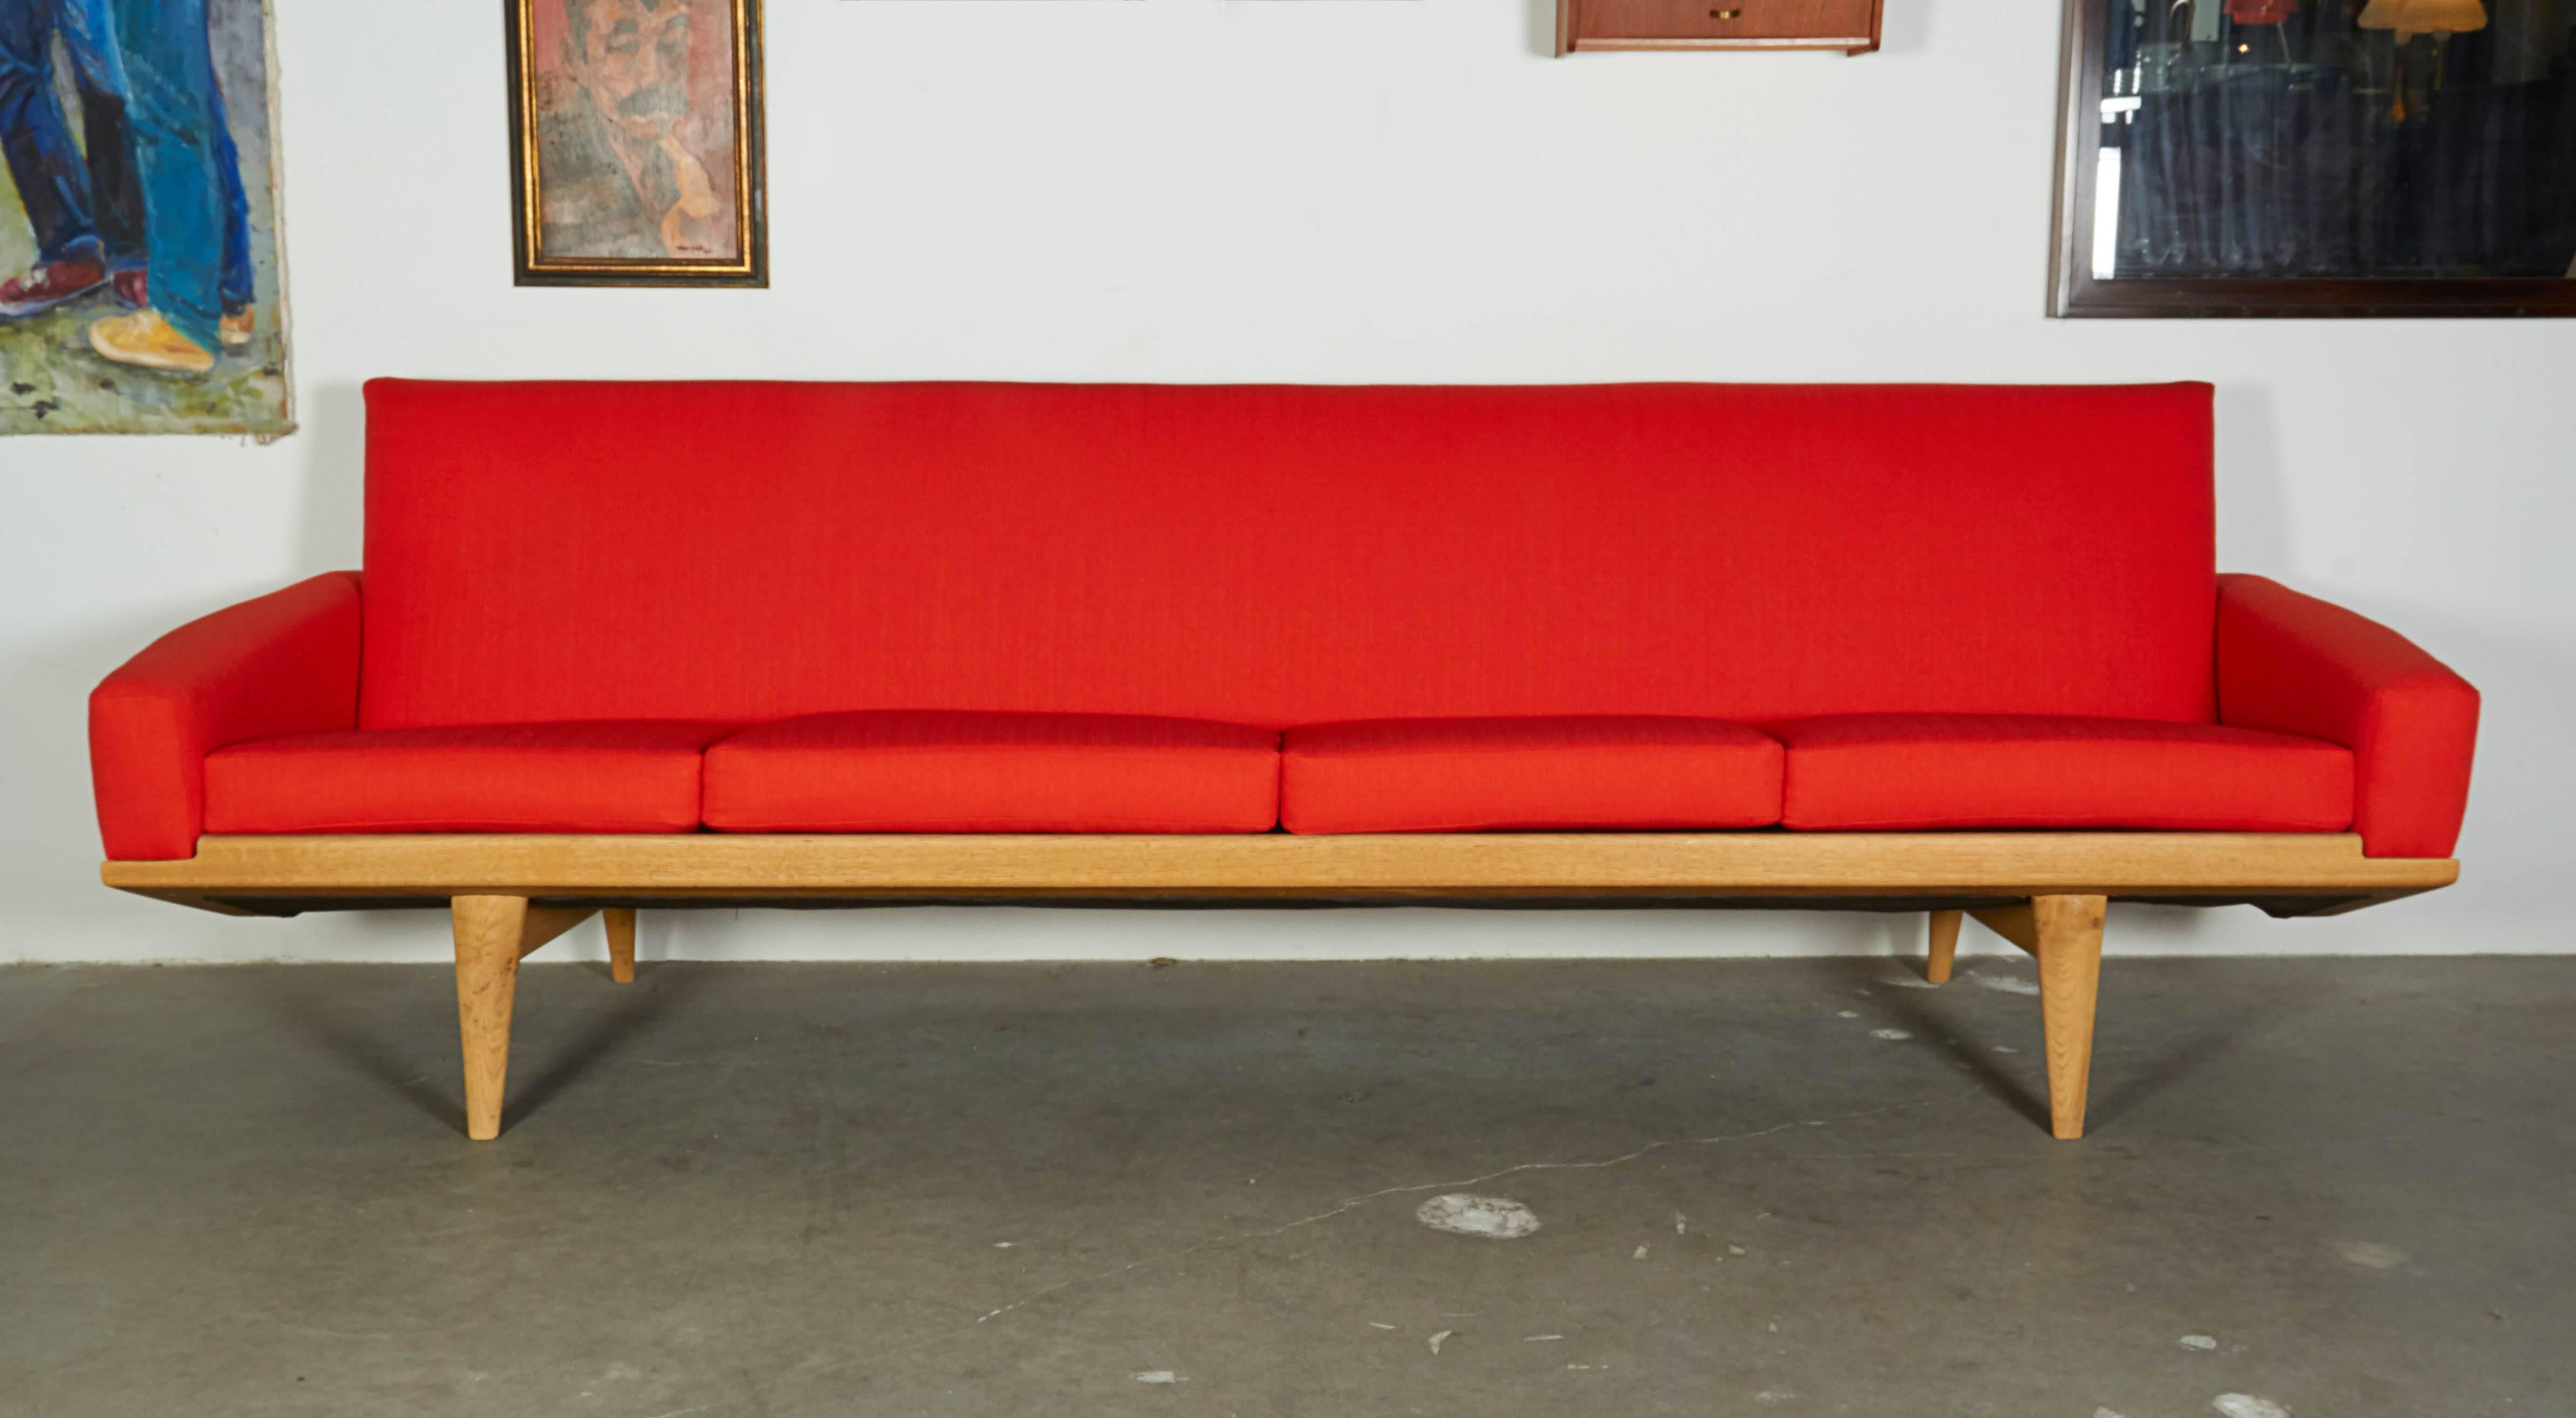 Vintage 1950s Danish Retro Orange Four-Seat Sofa Produced by N. A. Jørgensens Møbelfabrik.

This electric orange sofa is the best thing you'll see all day! Oak frame in like new condition and newly upholstered. Fabric is a re-issue from the late